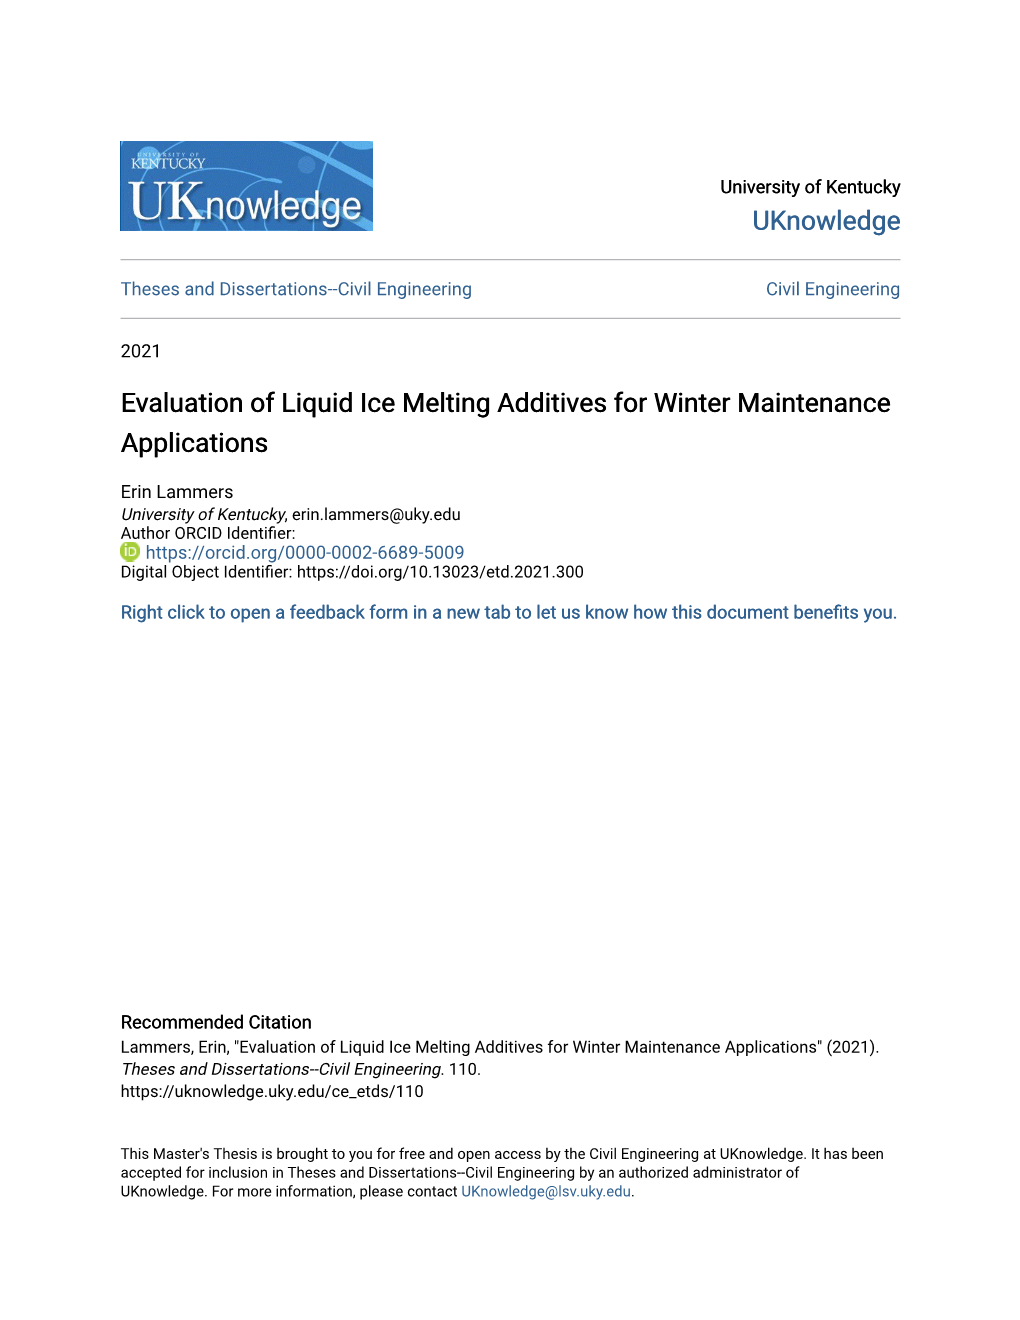 Evaluation of Liquid Ice Melting Additives for Winter Maintenance Applications